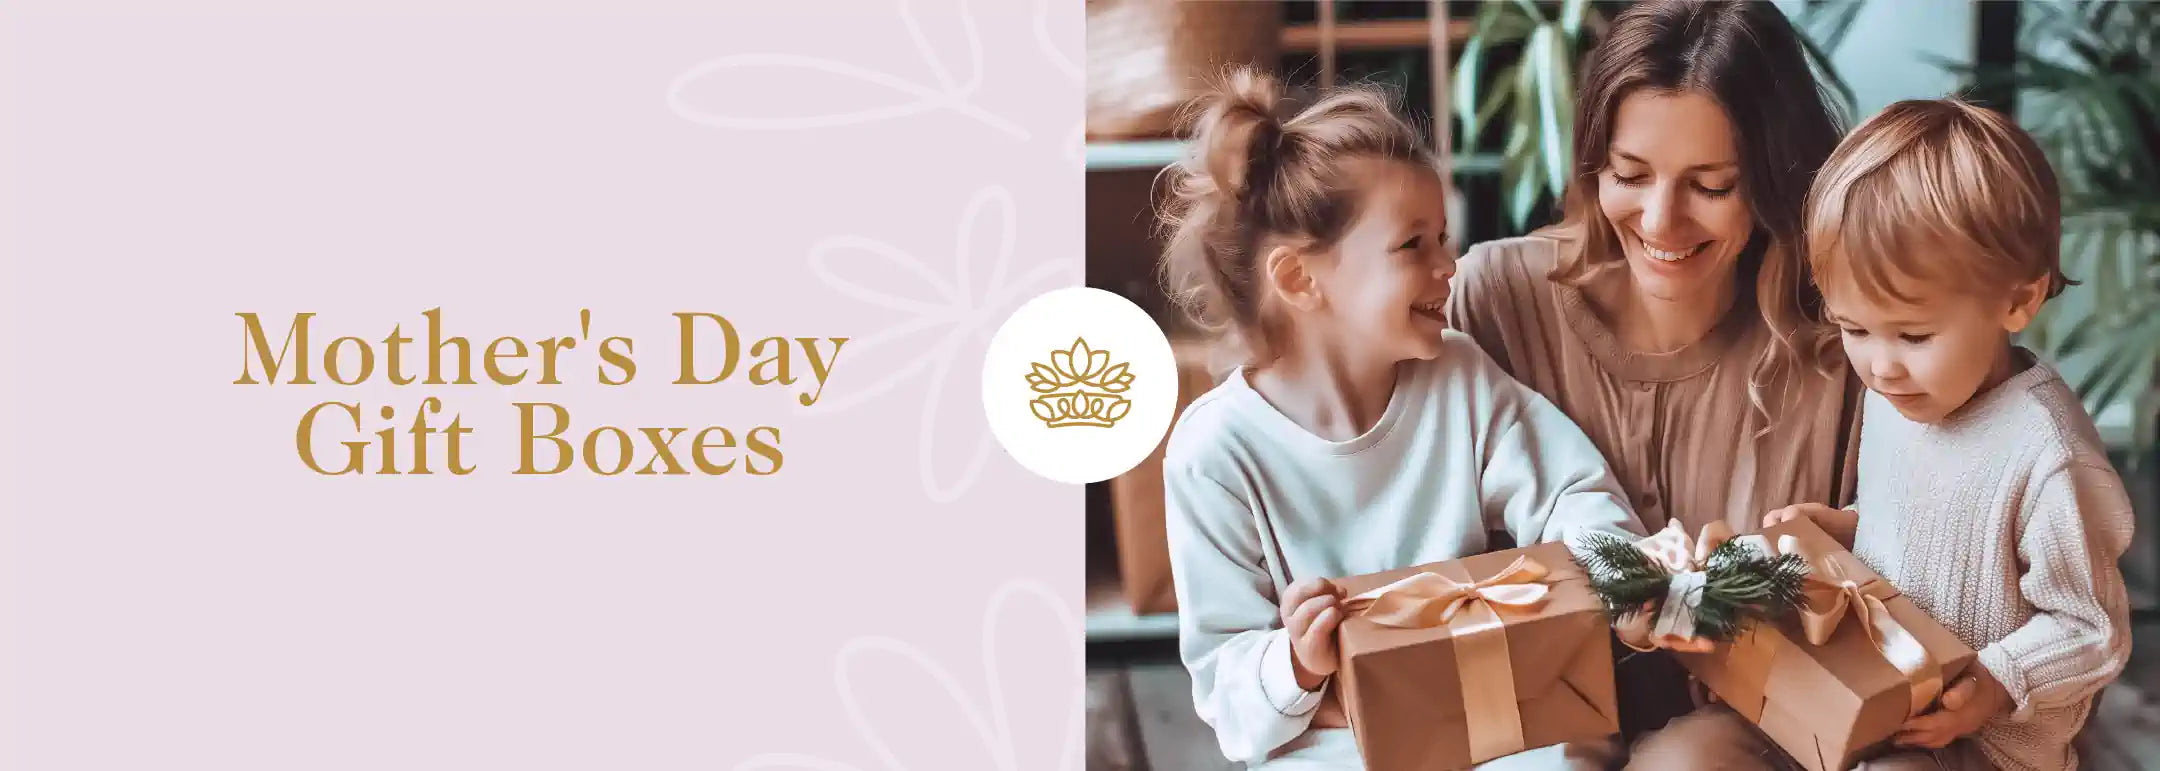 A heartwarming scene of a mother and her children smiling together as they open a Mother's Day gift box, capturing the essence of family love and celebration - Fabulous Flowers and Gifts.